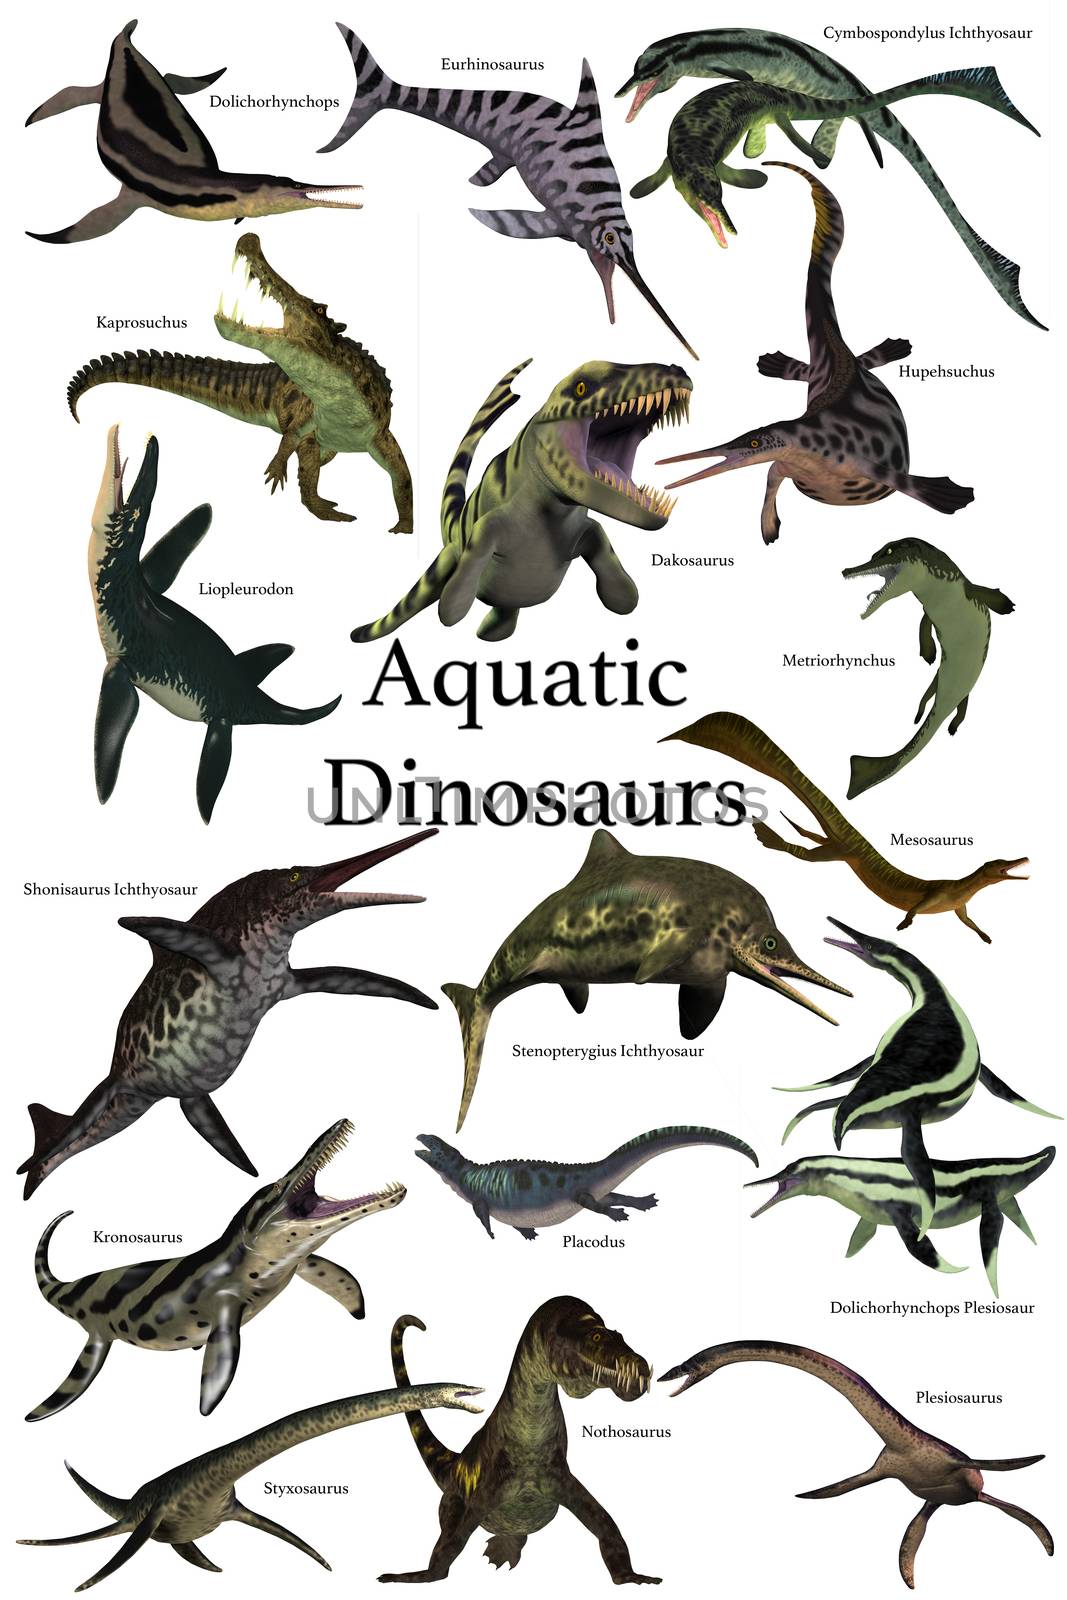 A collection of various marine reptile dinosaurs from different prehistoric periods of Earth's history.